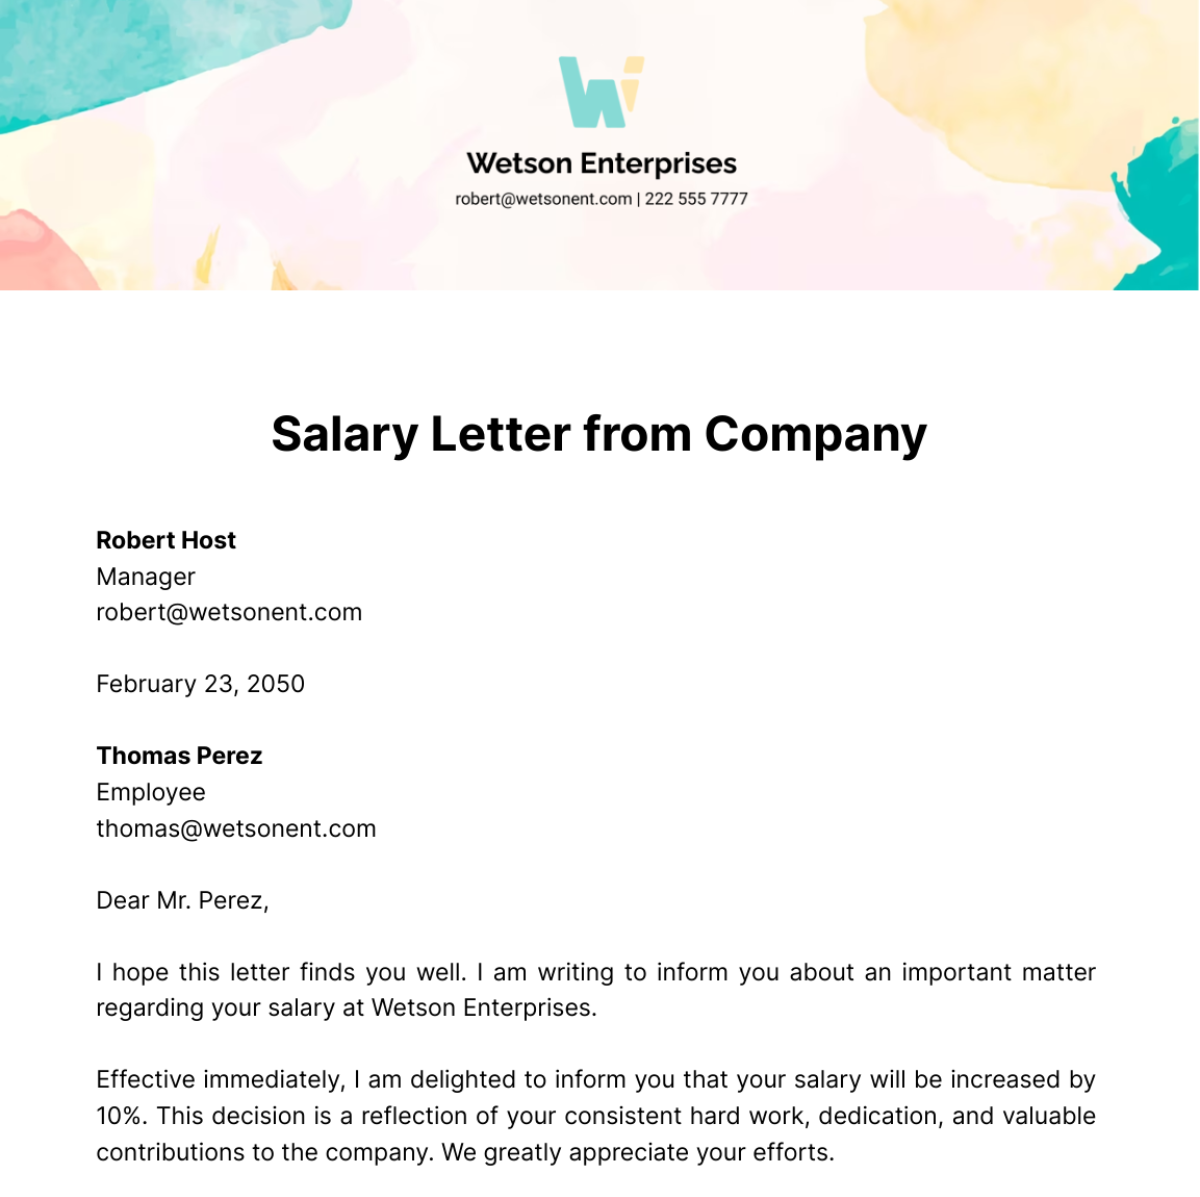 Salary Letter from Company Template